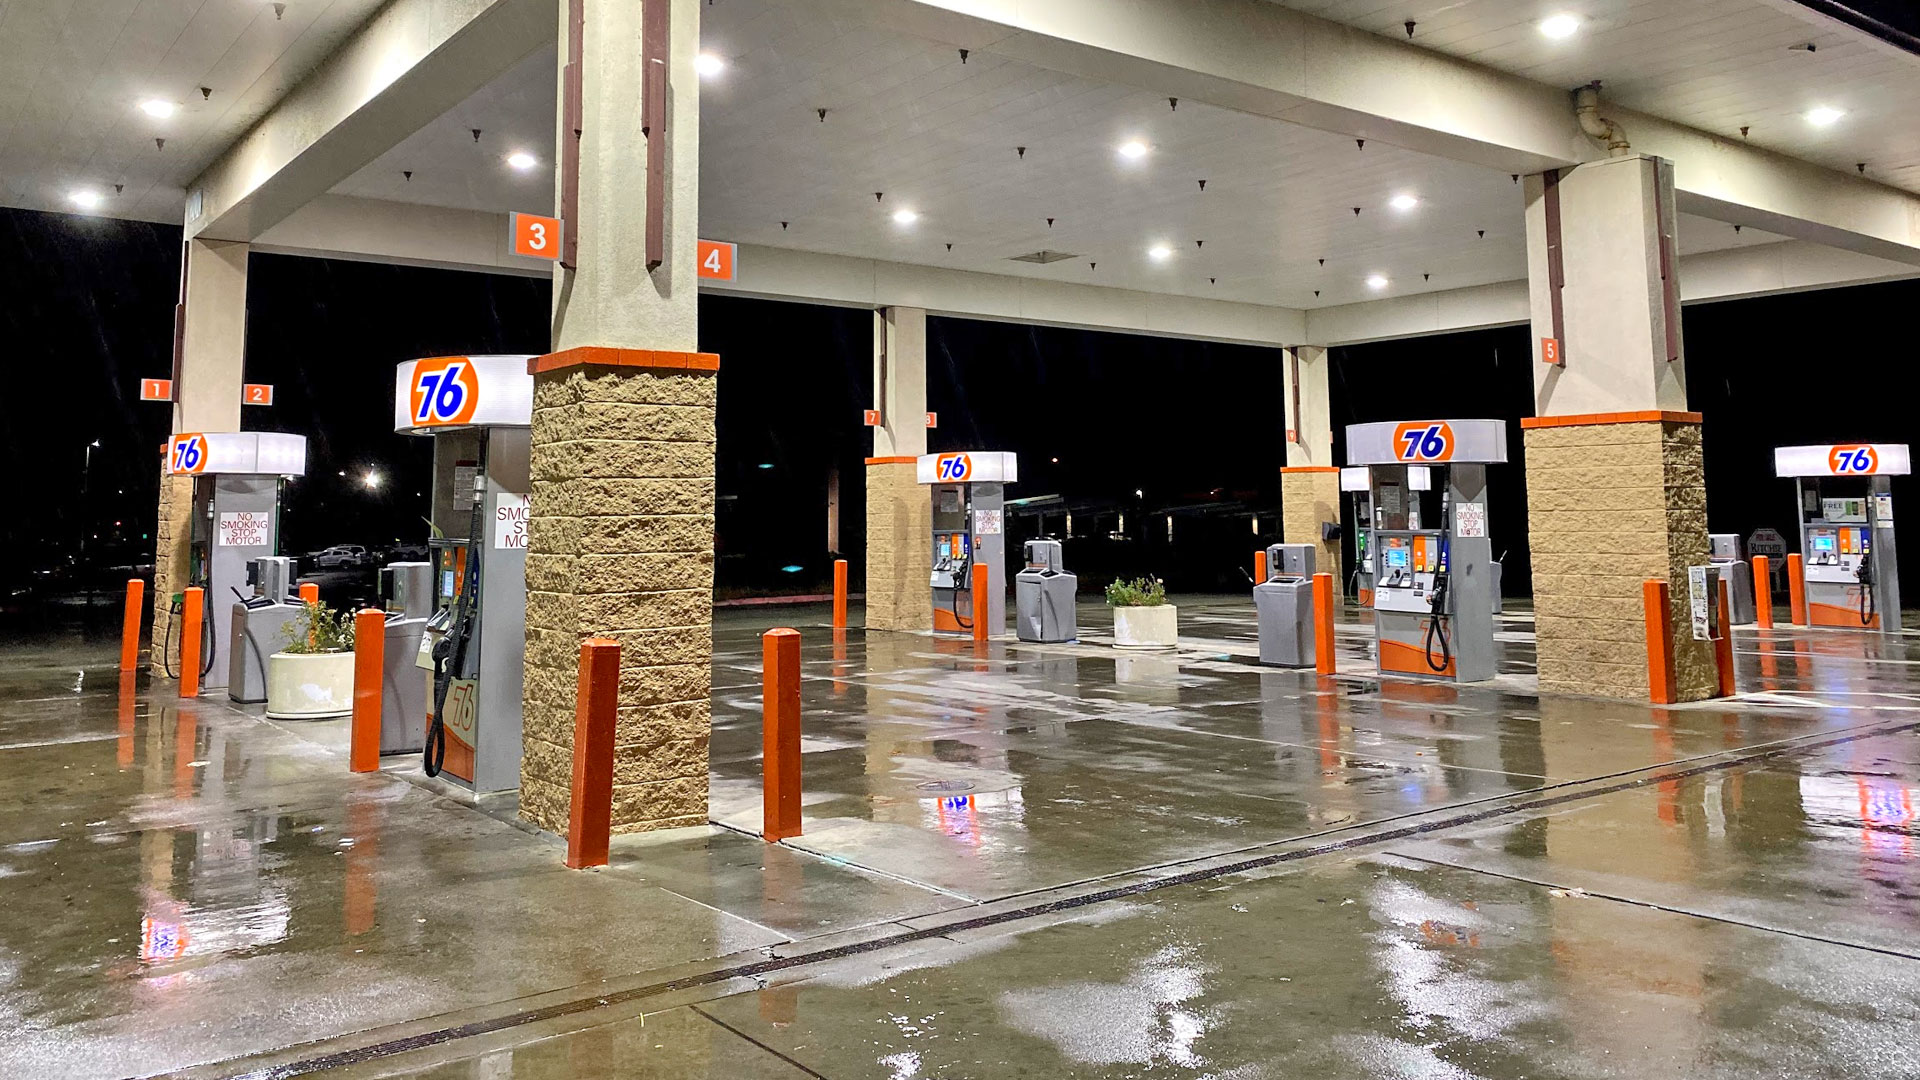 Gas station cleaned in San Jose, CA